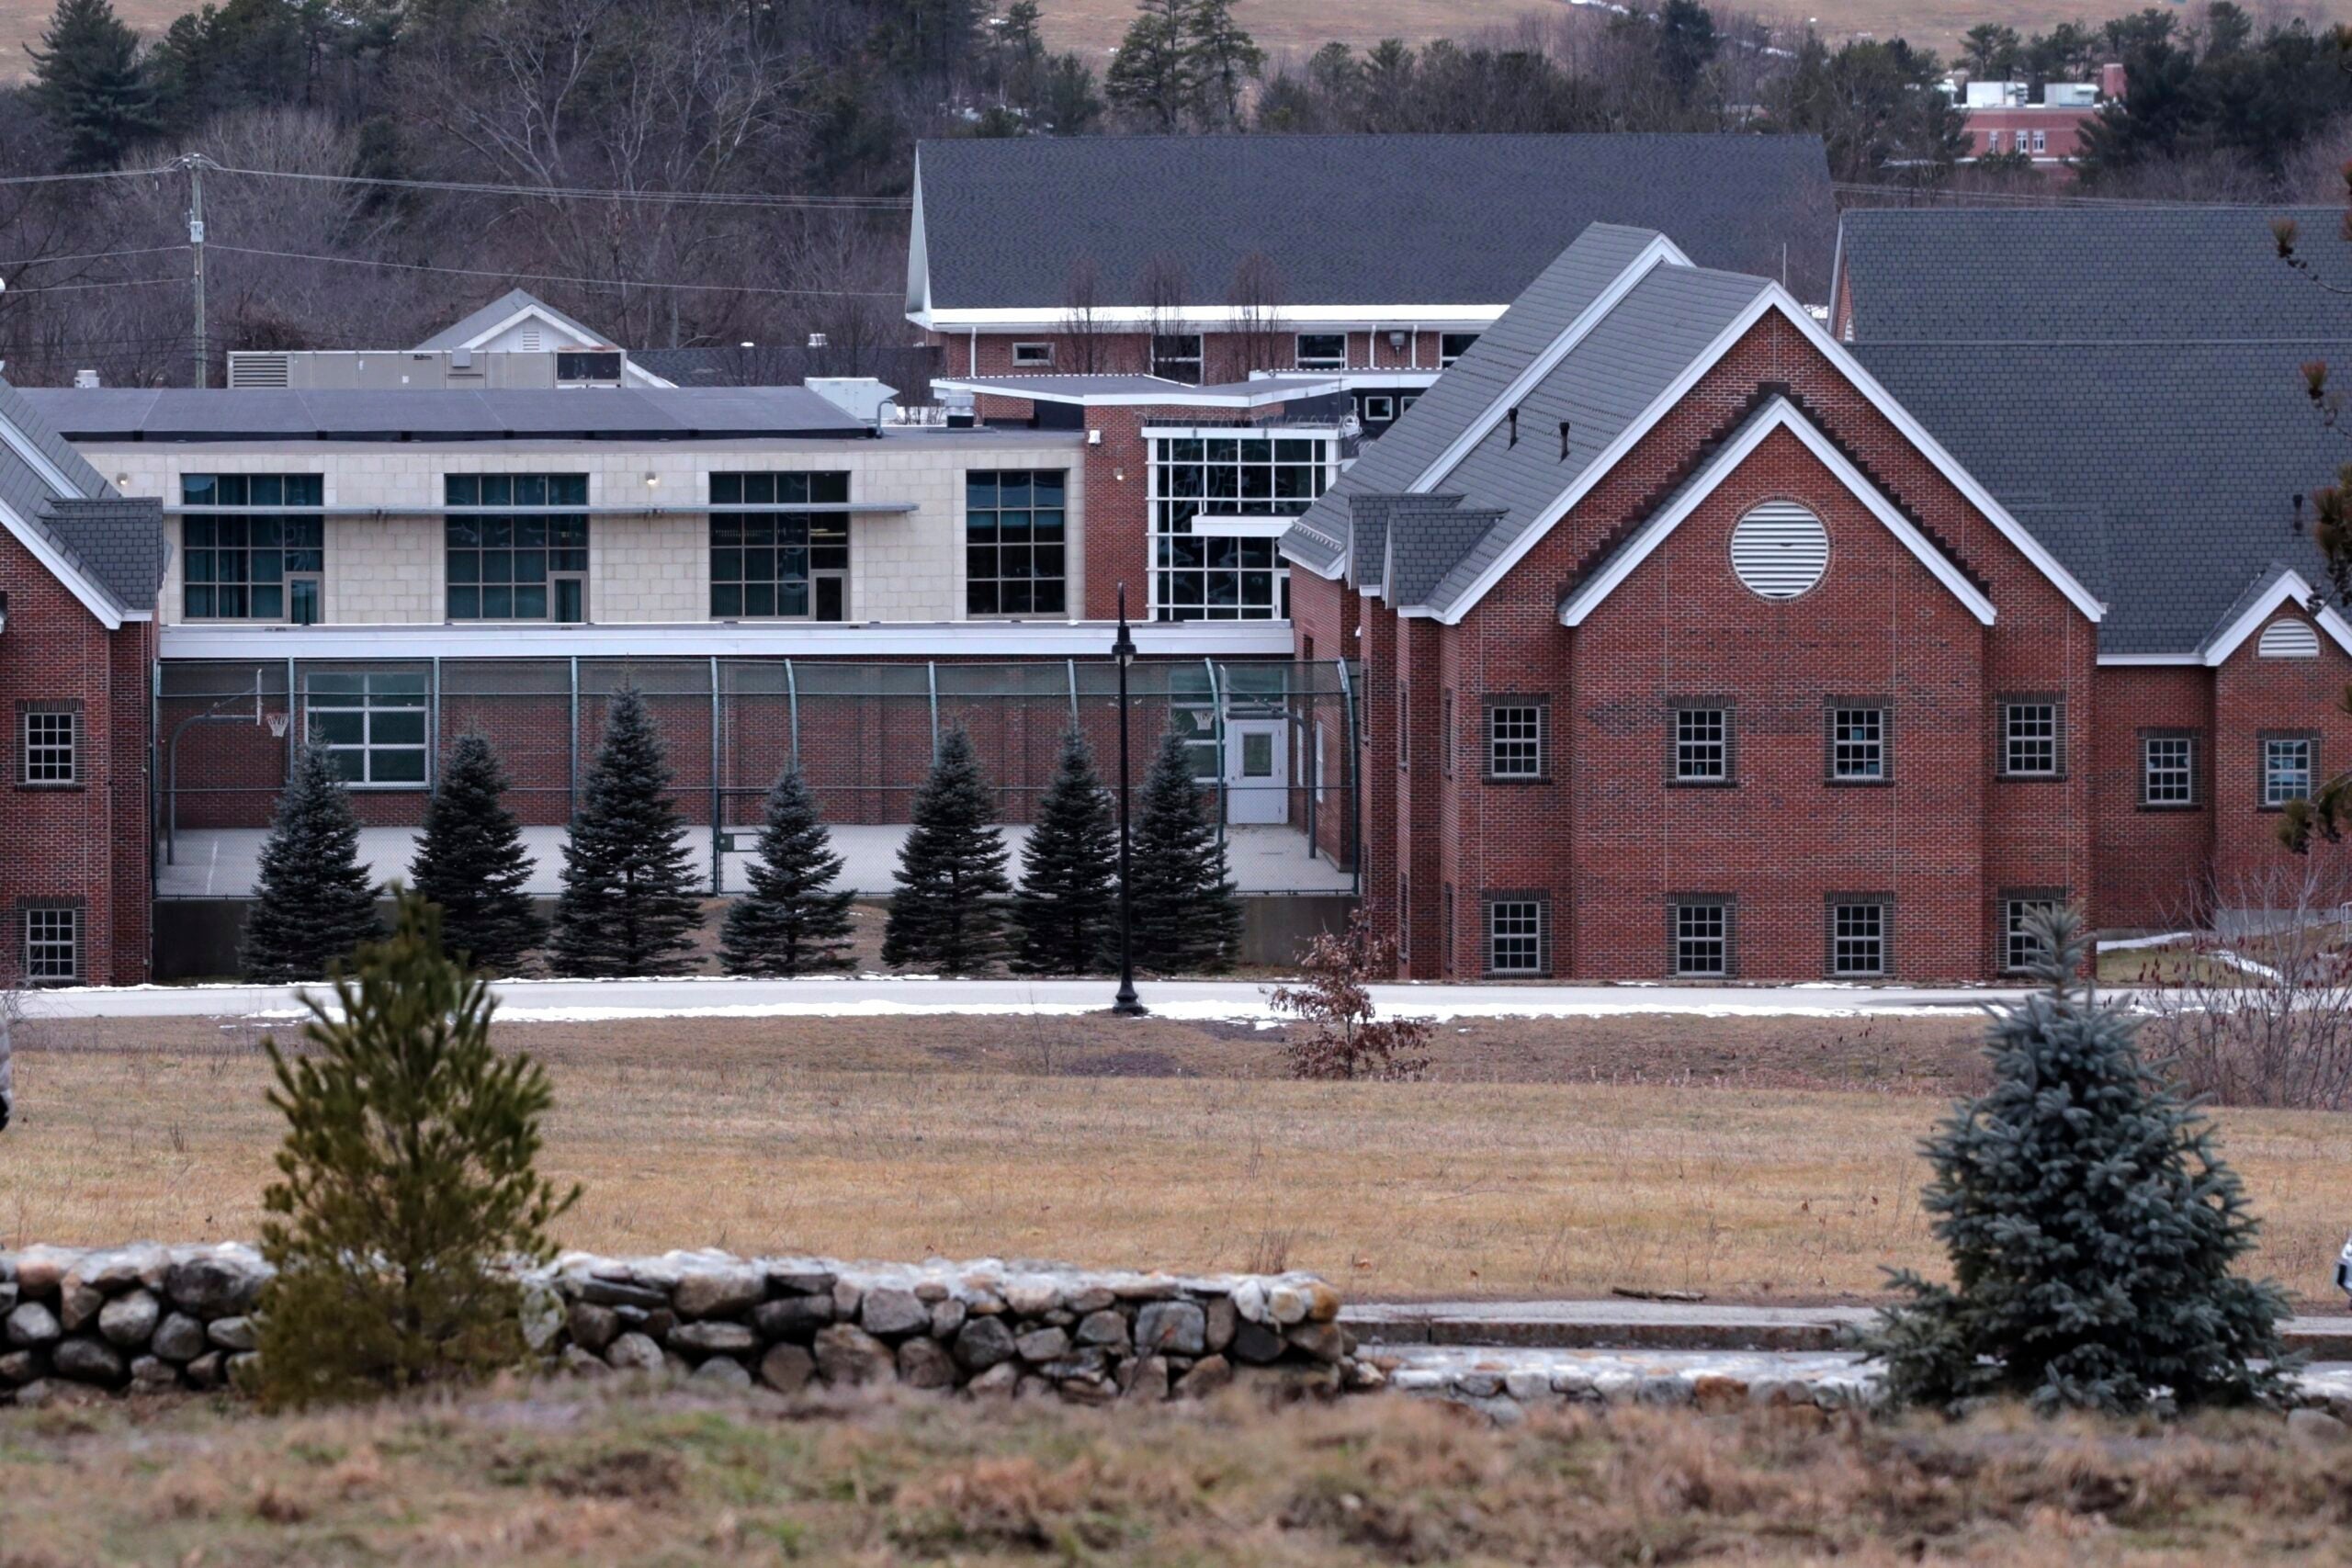 The Sununu Youth Services Center in Manchester, N.H., stands among trees.